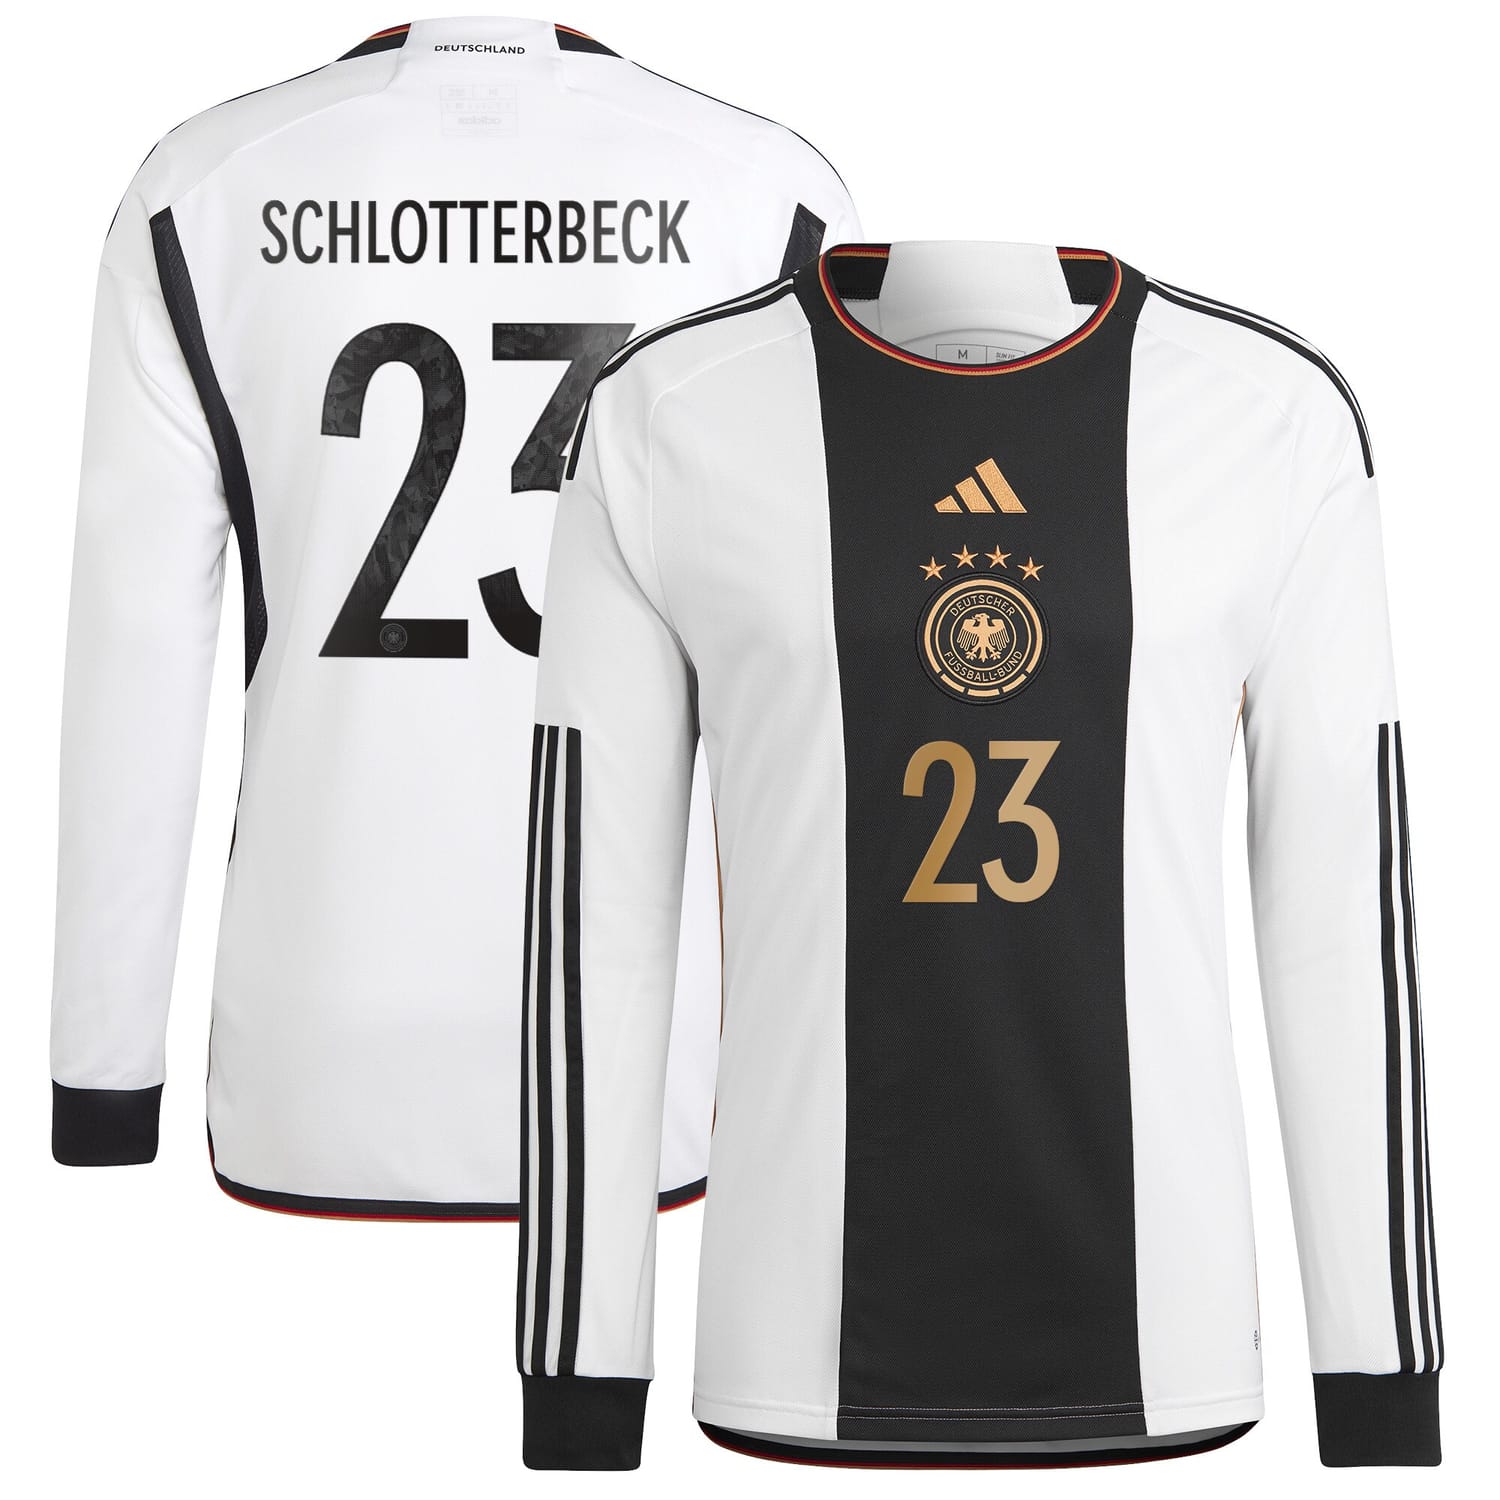 Germany National Team Home Jersey Shirt Long Sleeve player Nico Schlotterbeck 23 printing for Men